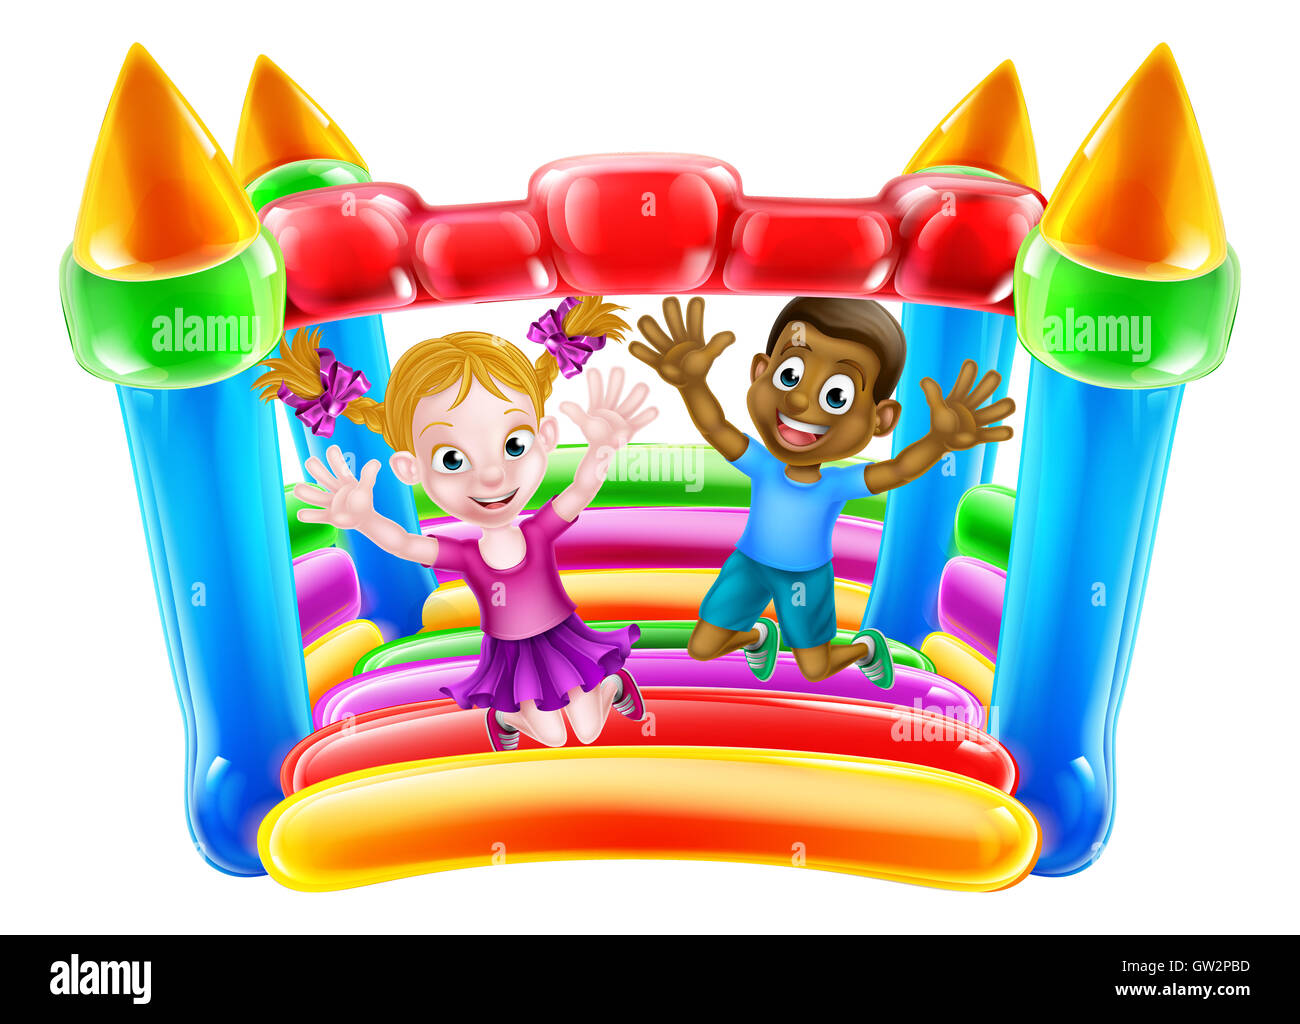 Cartoon kids Jumping on a bouncy castle Stock Photo, Royalty Free Image